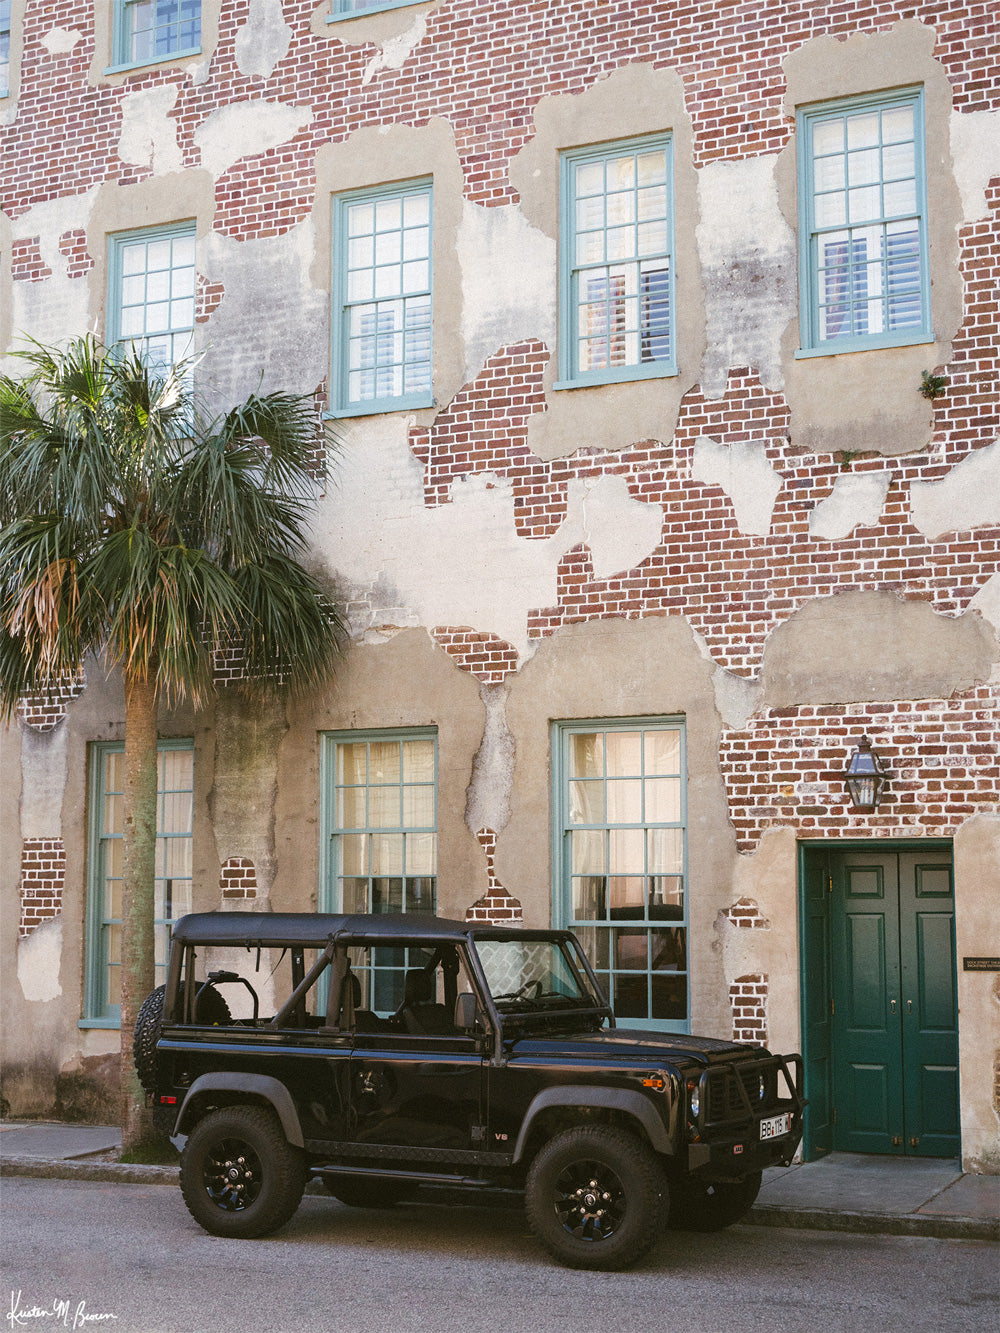  "Dock D90" photo print of Land Rover Defender 90 in historic downtown Charleston, SC. Photographed by Kristen M. Brown of Samba to the Sea for The Sunset Shop.